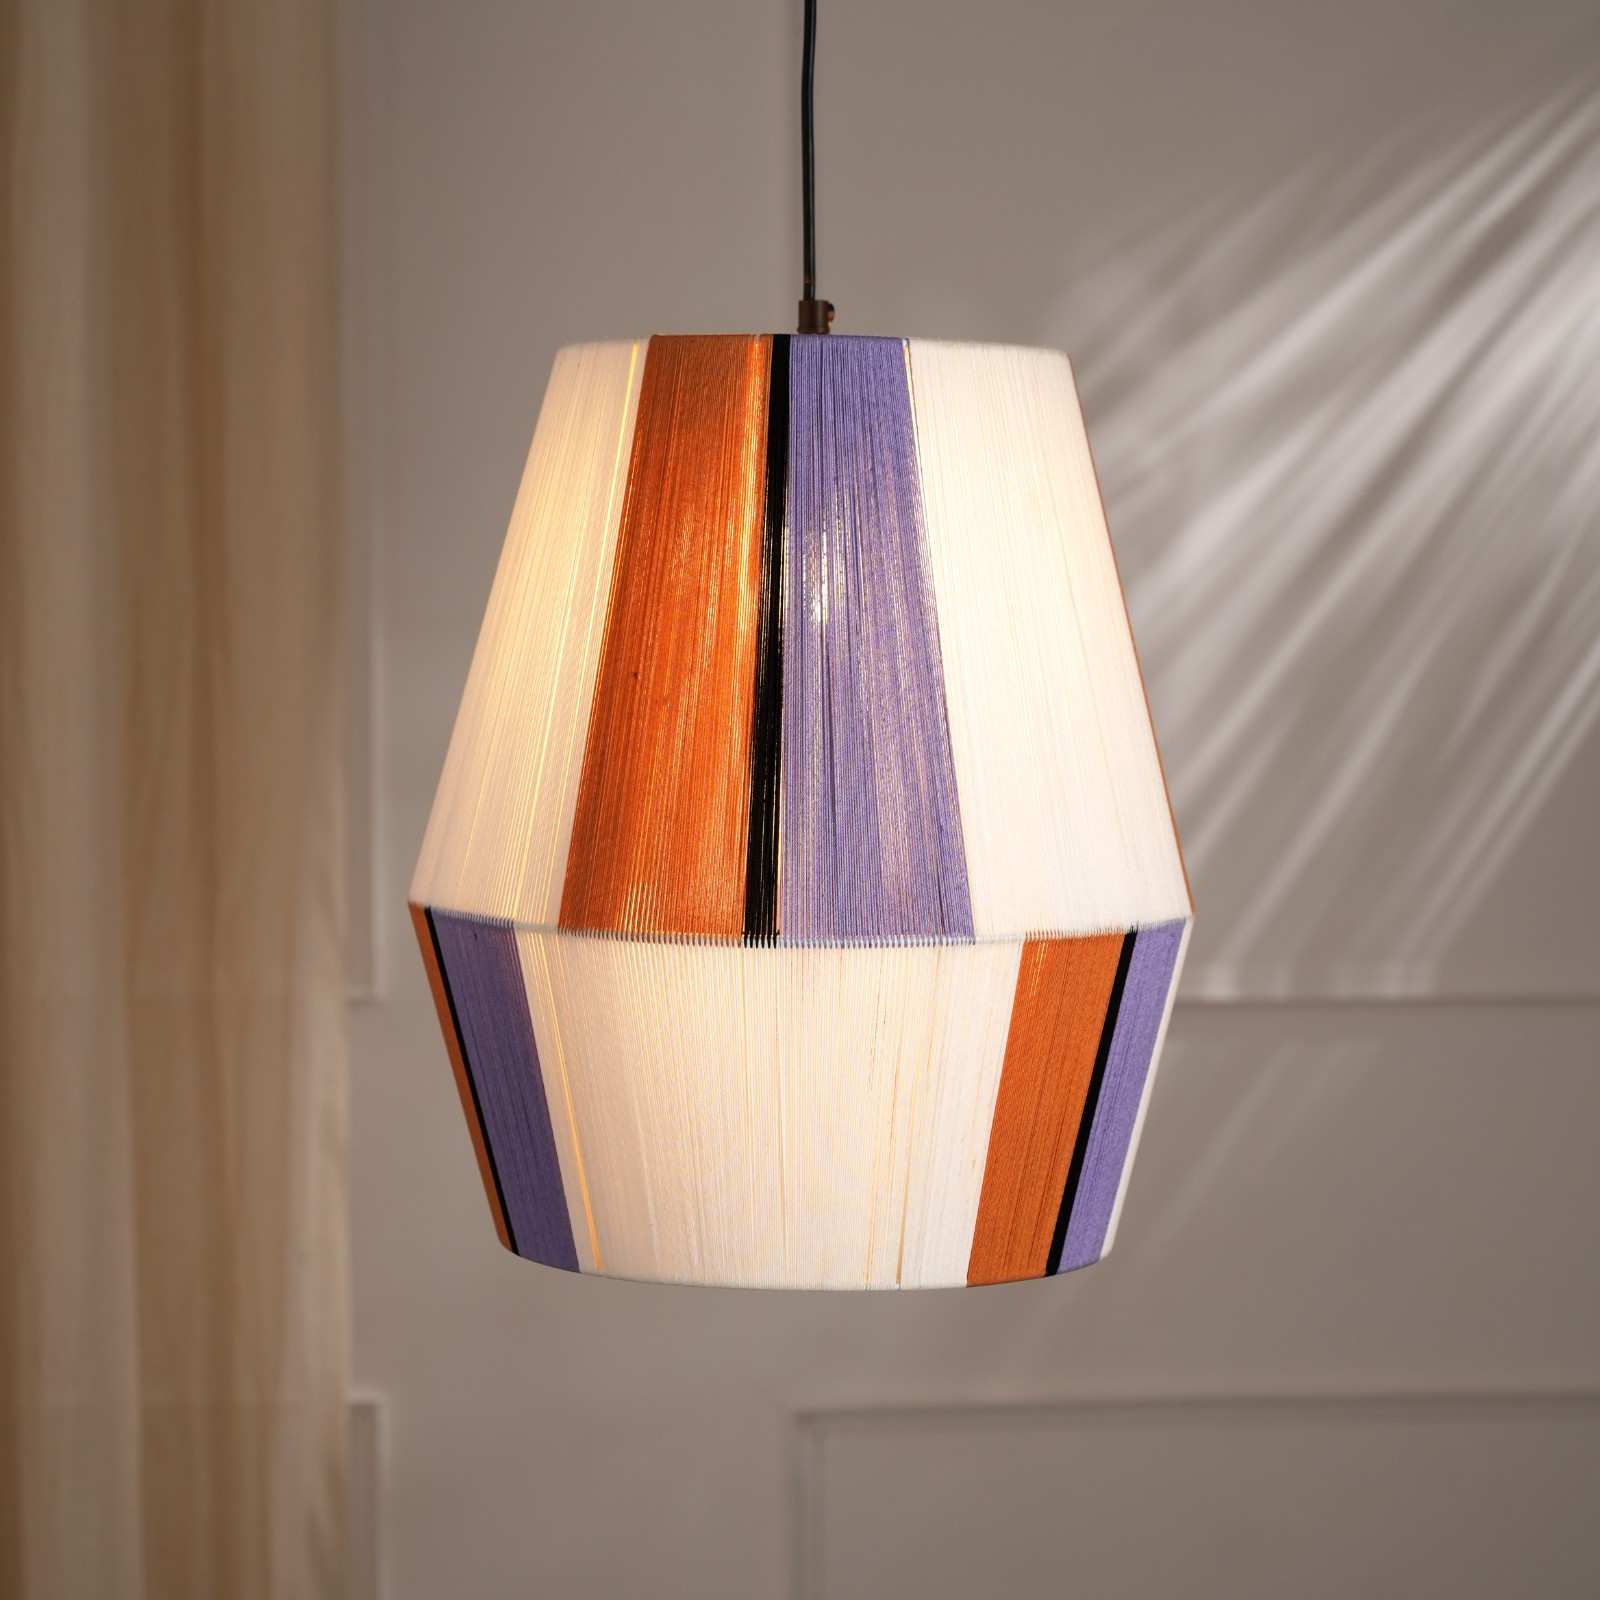 Colour Story 200 - Limited Edition Threading Pattern, Cotton Threading Lampshade, Sturdy Construction